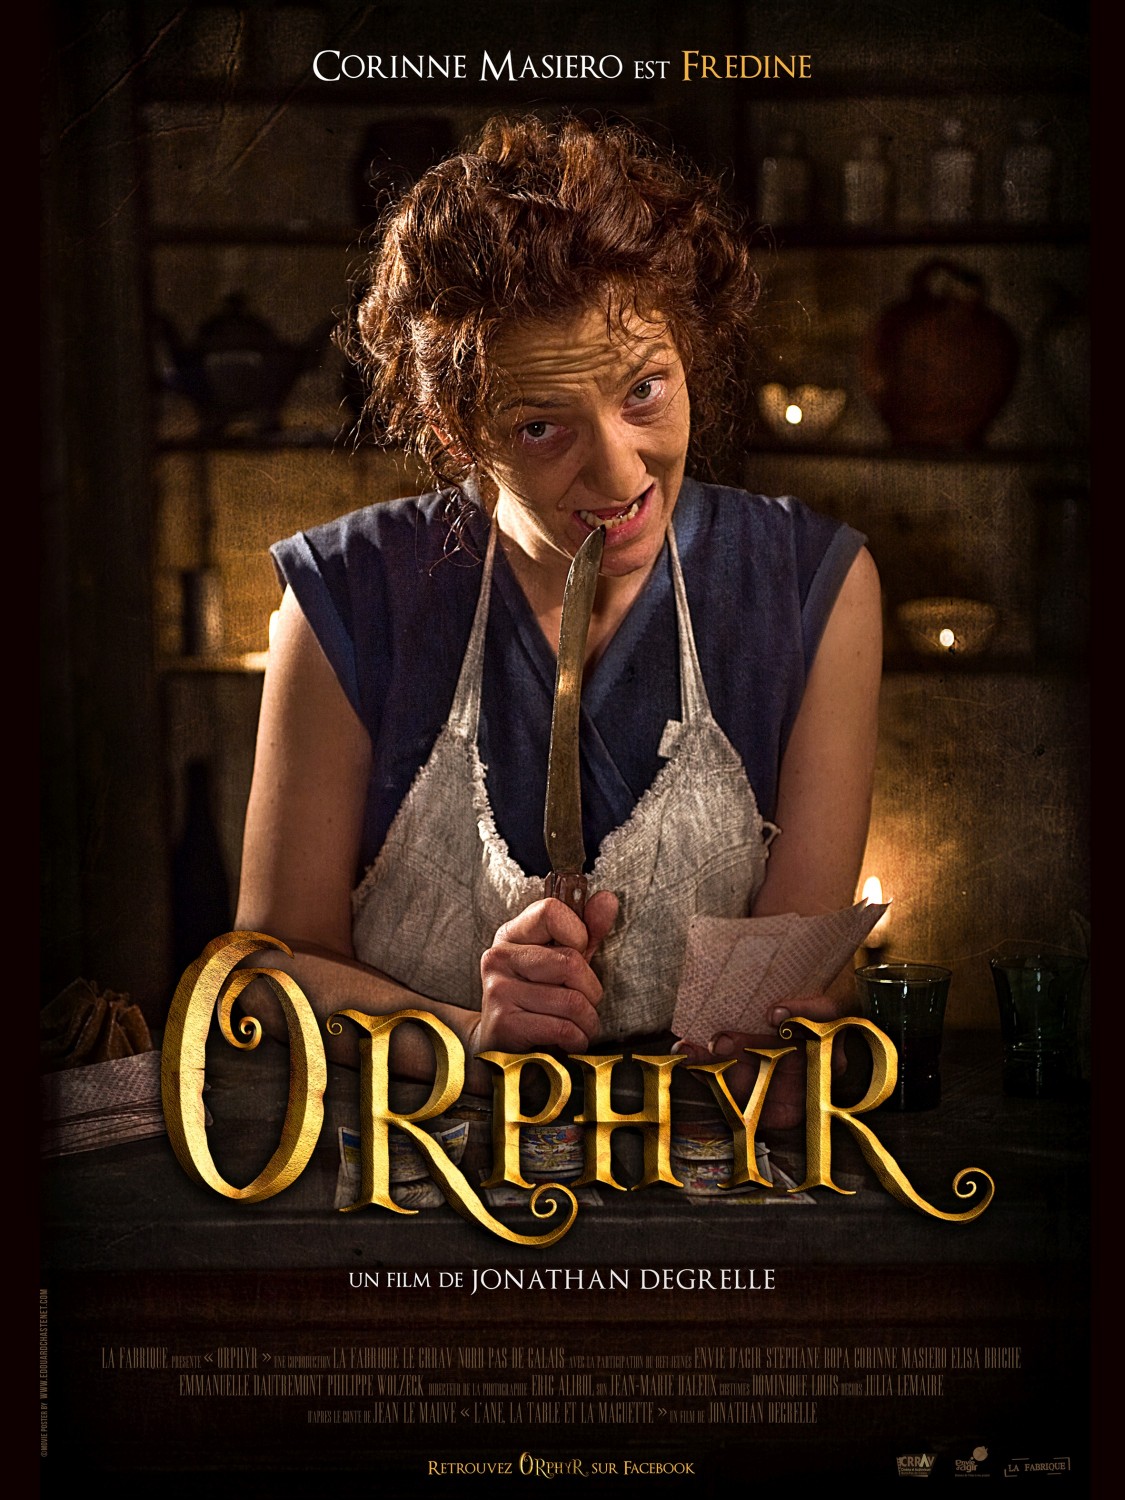 Extra Large Movie Poster Image for Orphyr